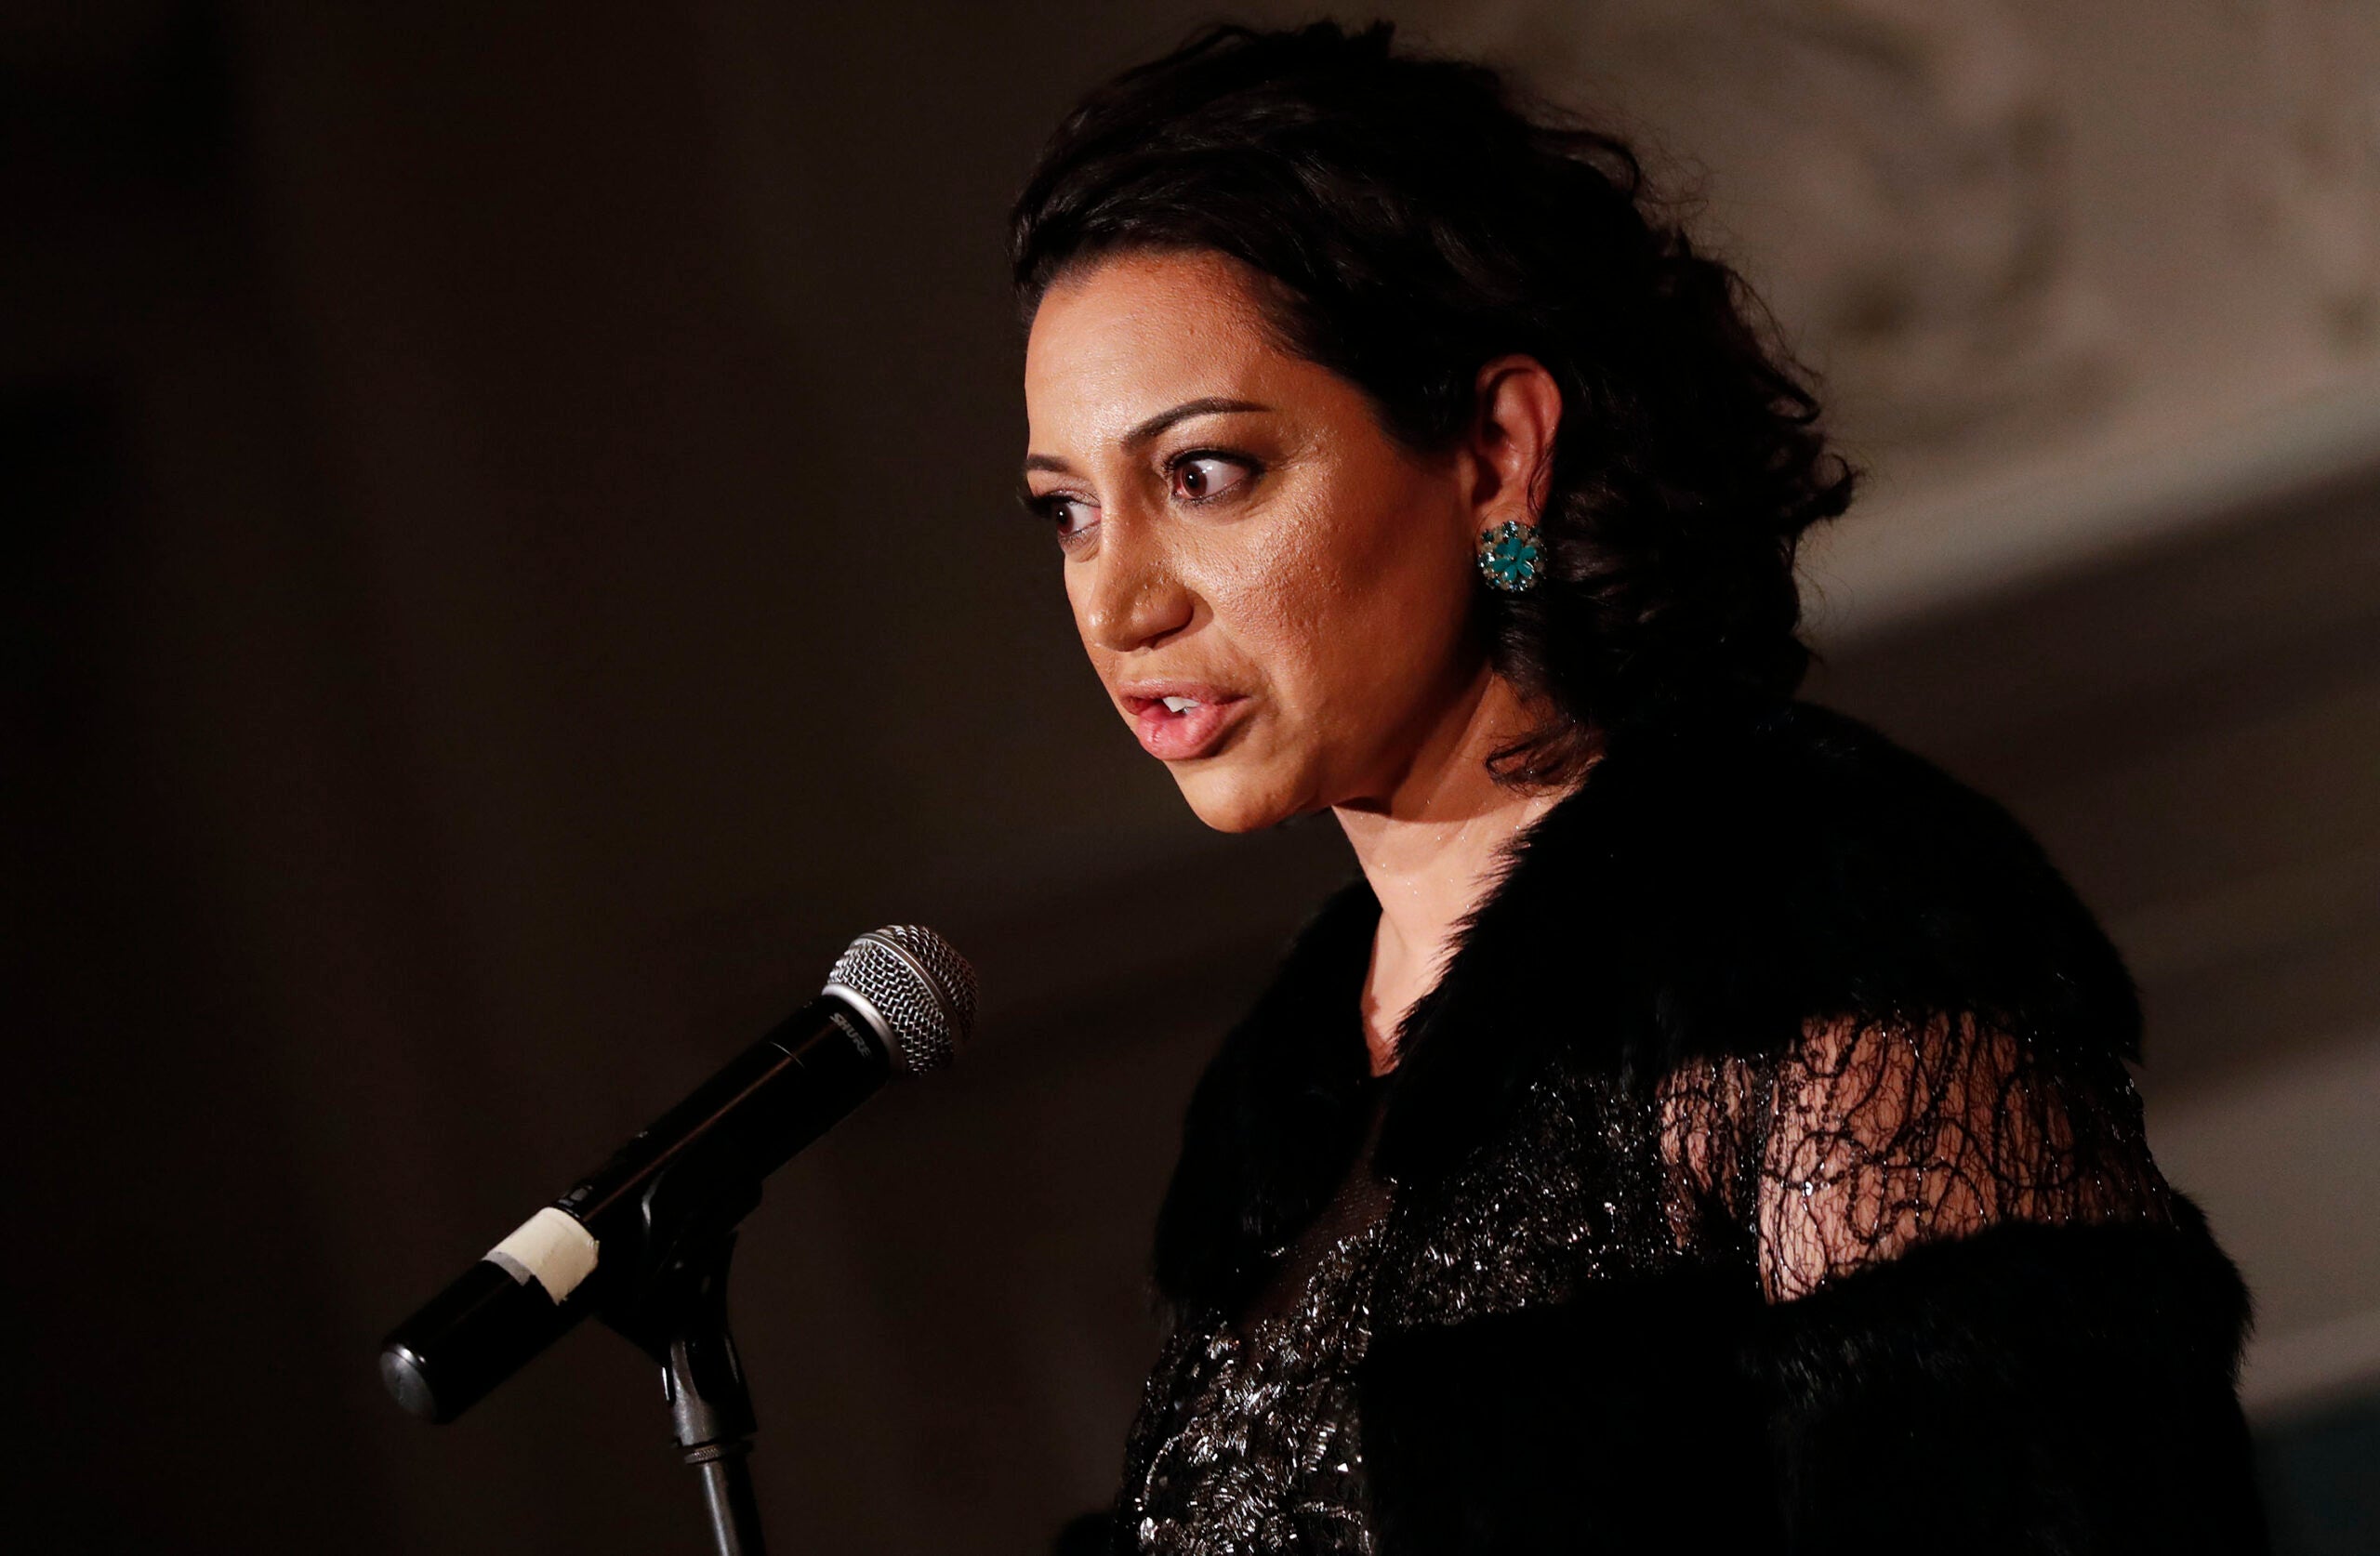 WASHINGTON, DC - JANUARY 20: Assal Ravandi, Founder &amp; CEO, The Academy of United States Veterans Foundation, speaks during the 3rd Annual Vetty Awards at The Mayflower Hotel on January 20, 2018 in Washington, DC.  (Photo by Paul Morigi/Getty Images)